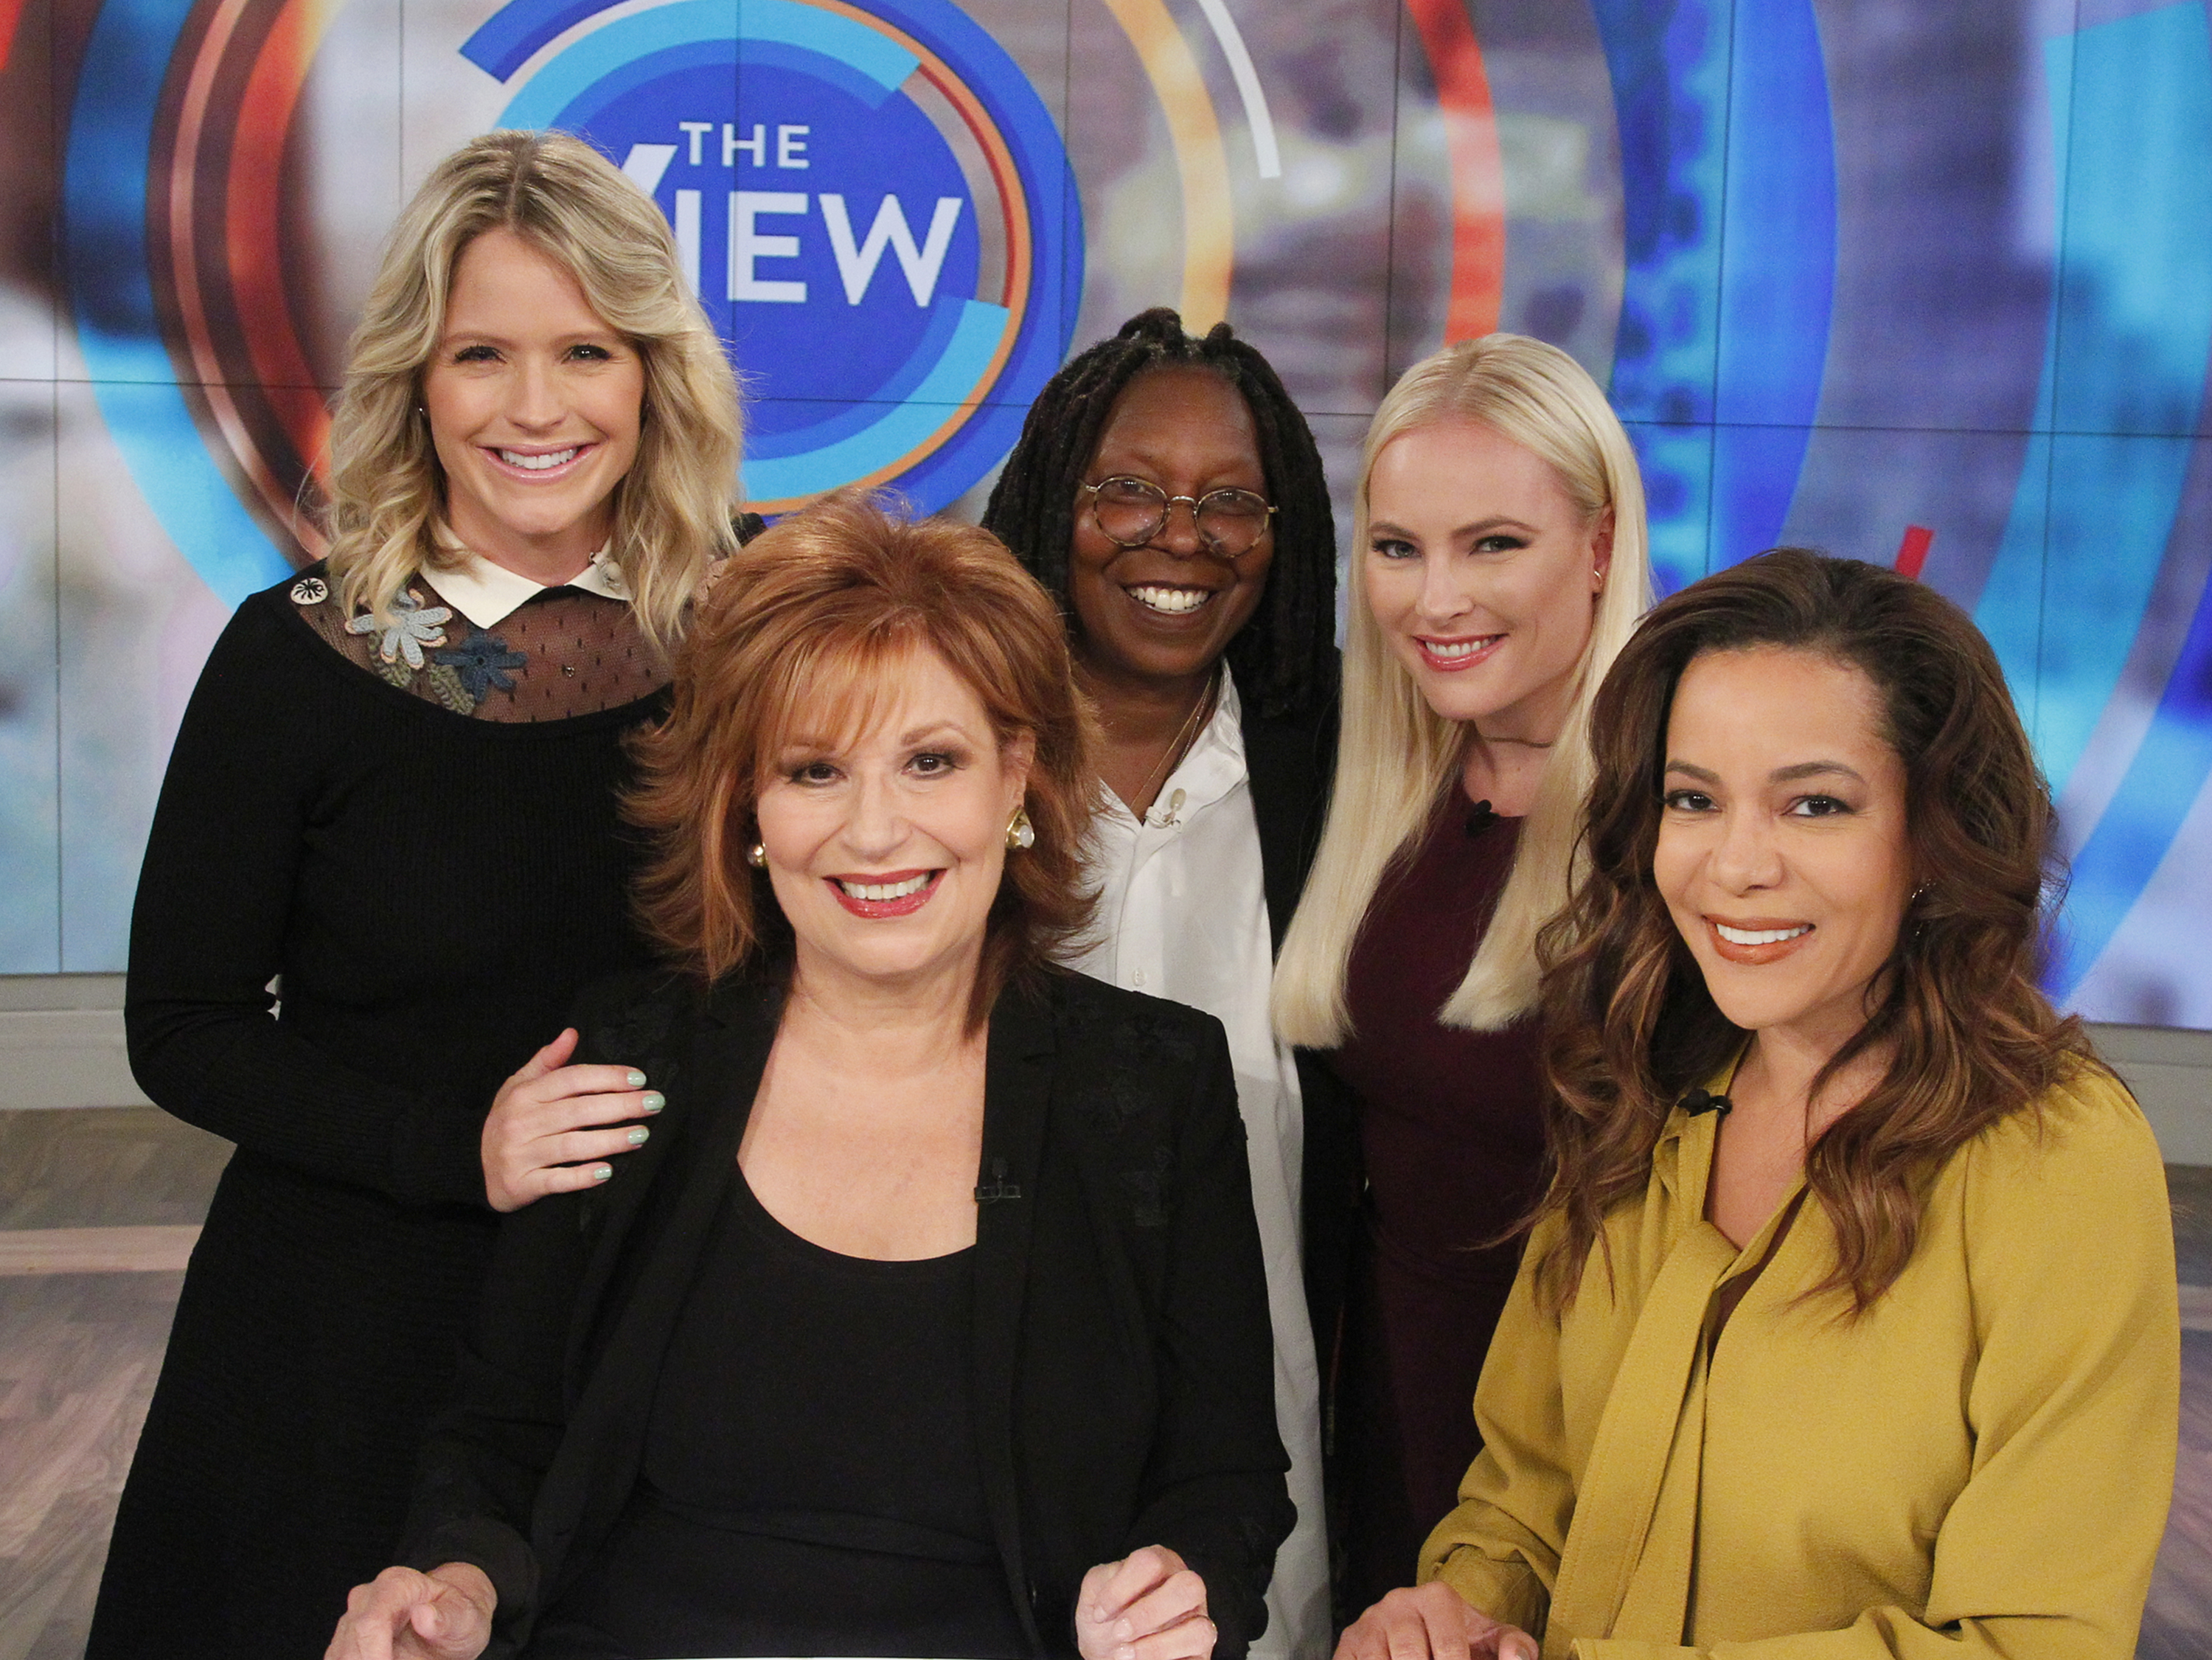 The cast of "The View" season 20 in 2017 | Source: Getty Images